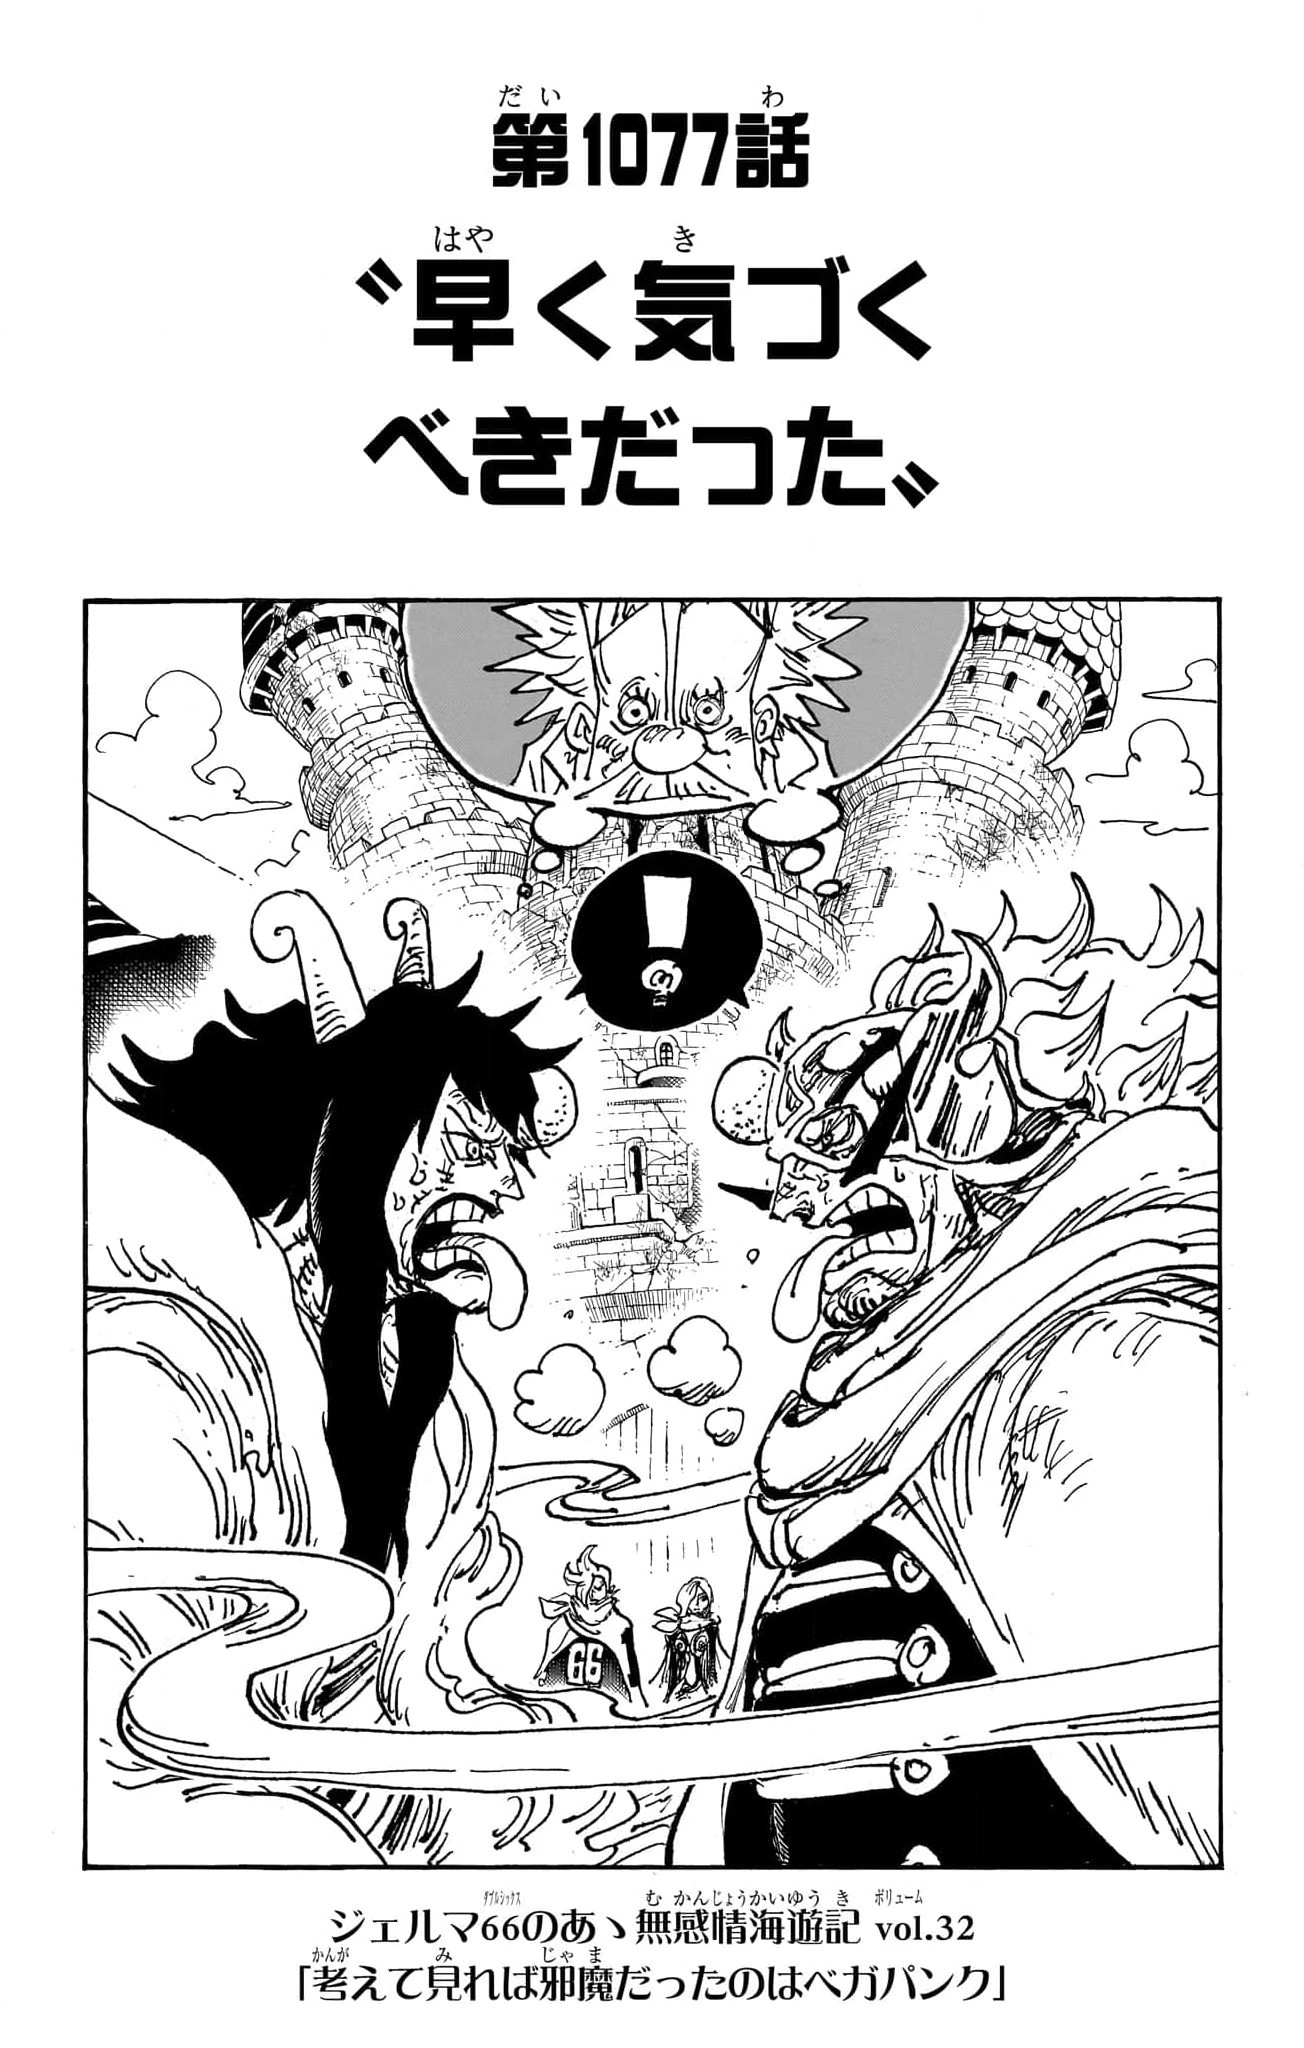 One Piece Chapter 1065 Discussion - Forums 